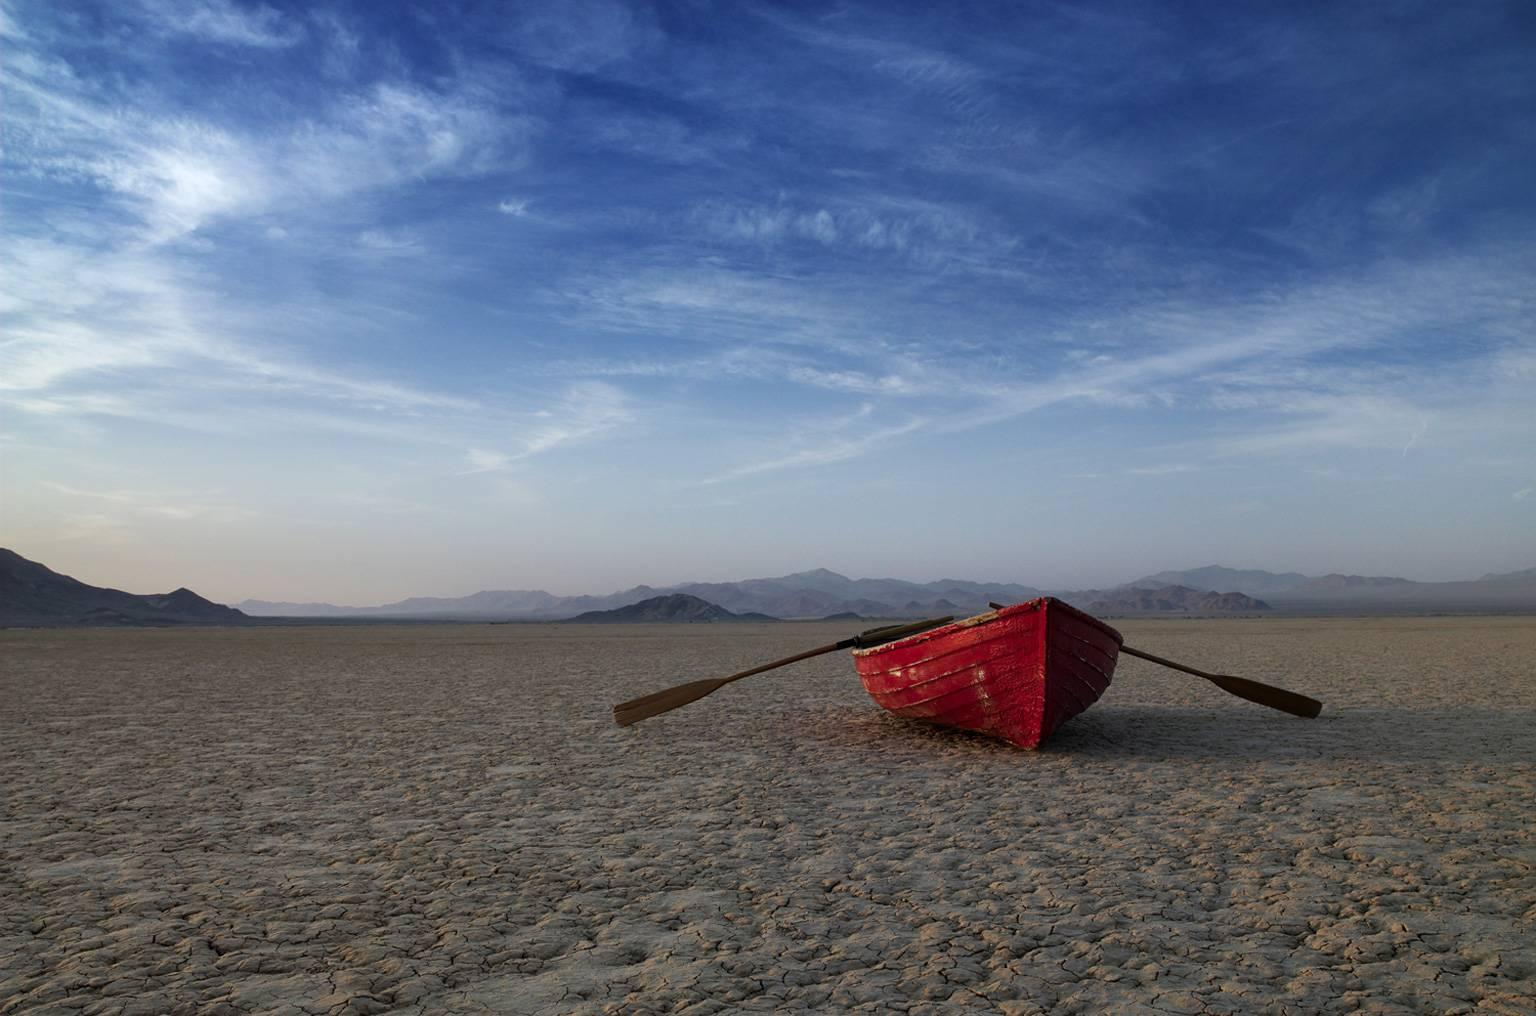 On Land - large format photograph of iconic wooden row boat on desert lake bed